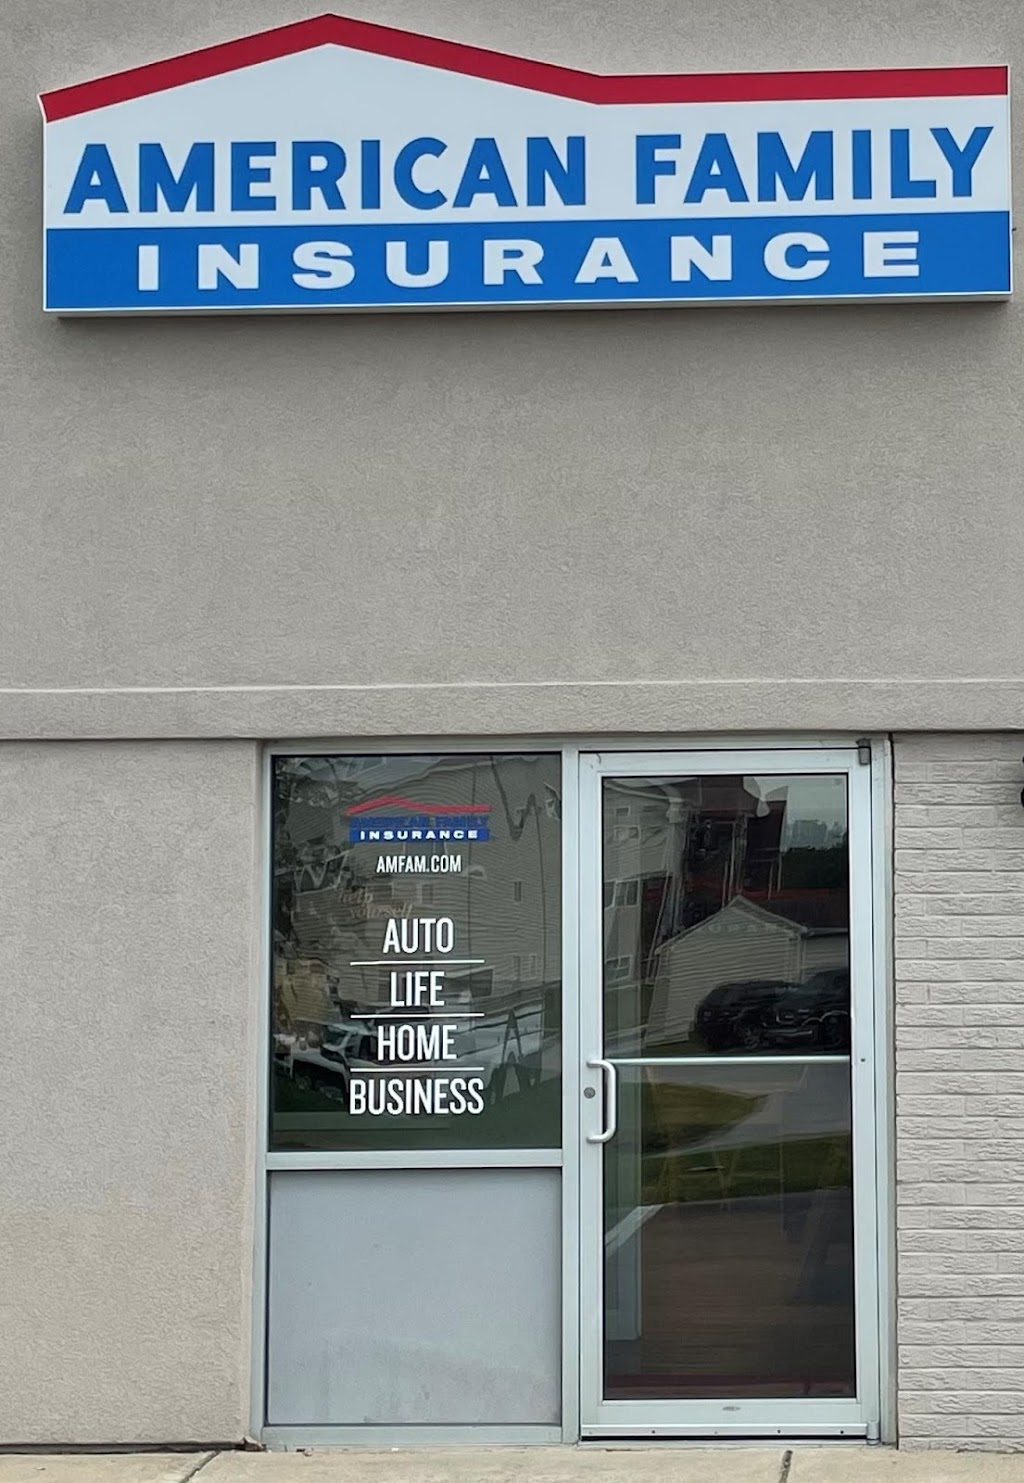 Wilcox & Company INC American Family Insurance | 5124 Pine Island Dr Ste E, Crown Point, IN 46307, USA | Phone: (219) 865-3233